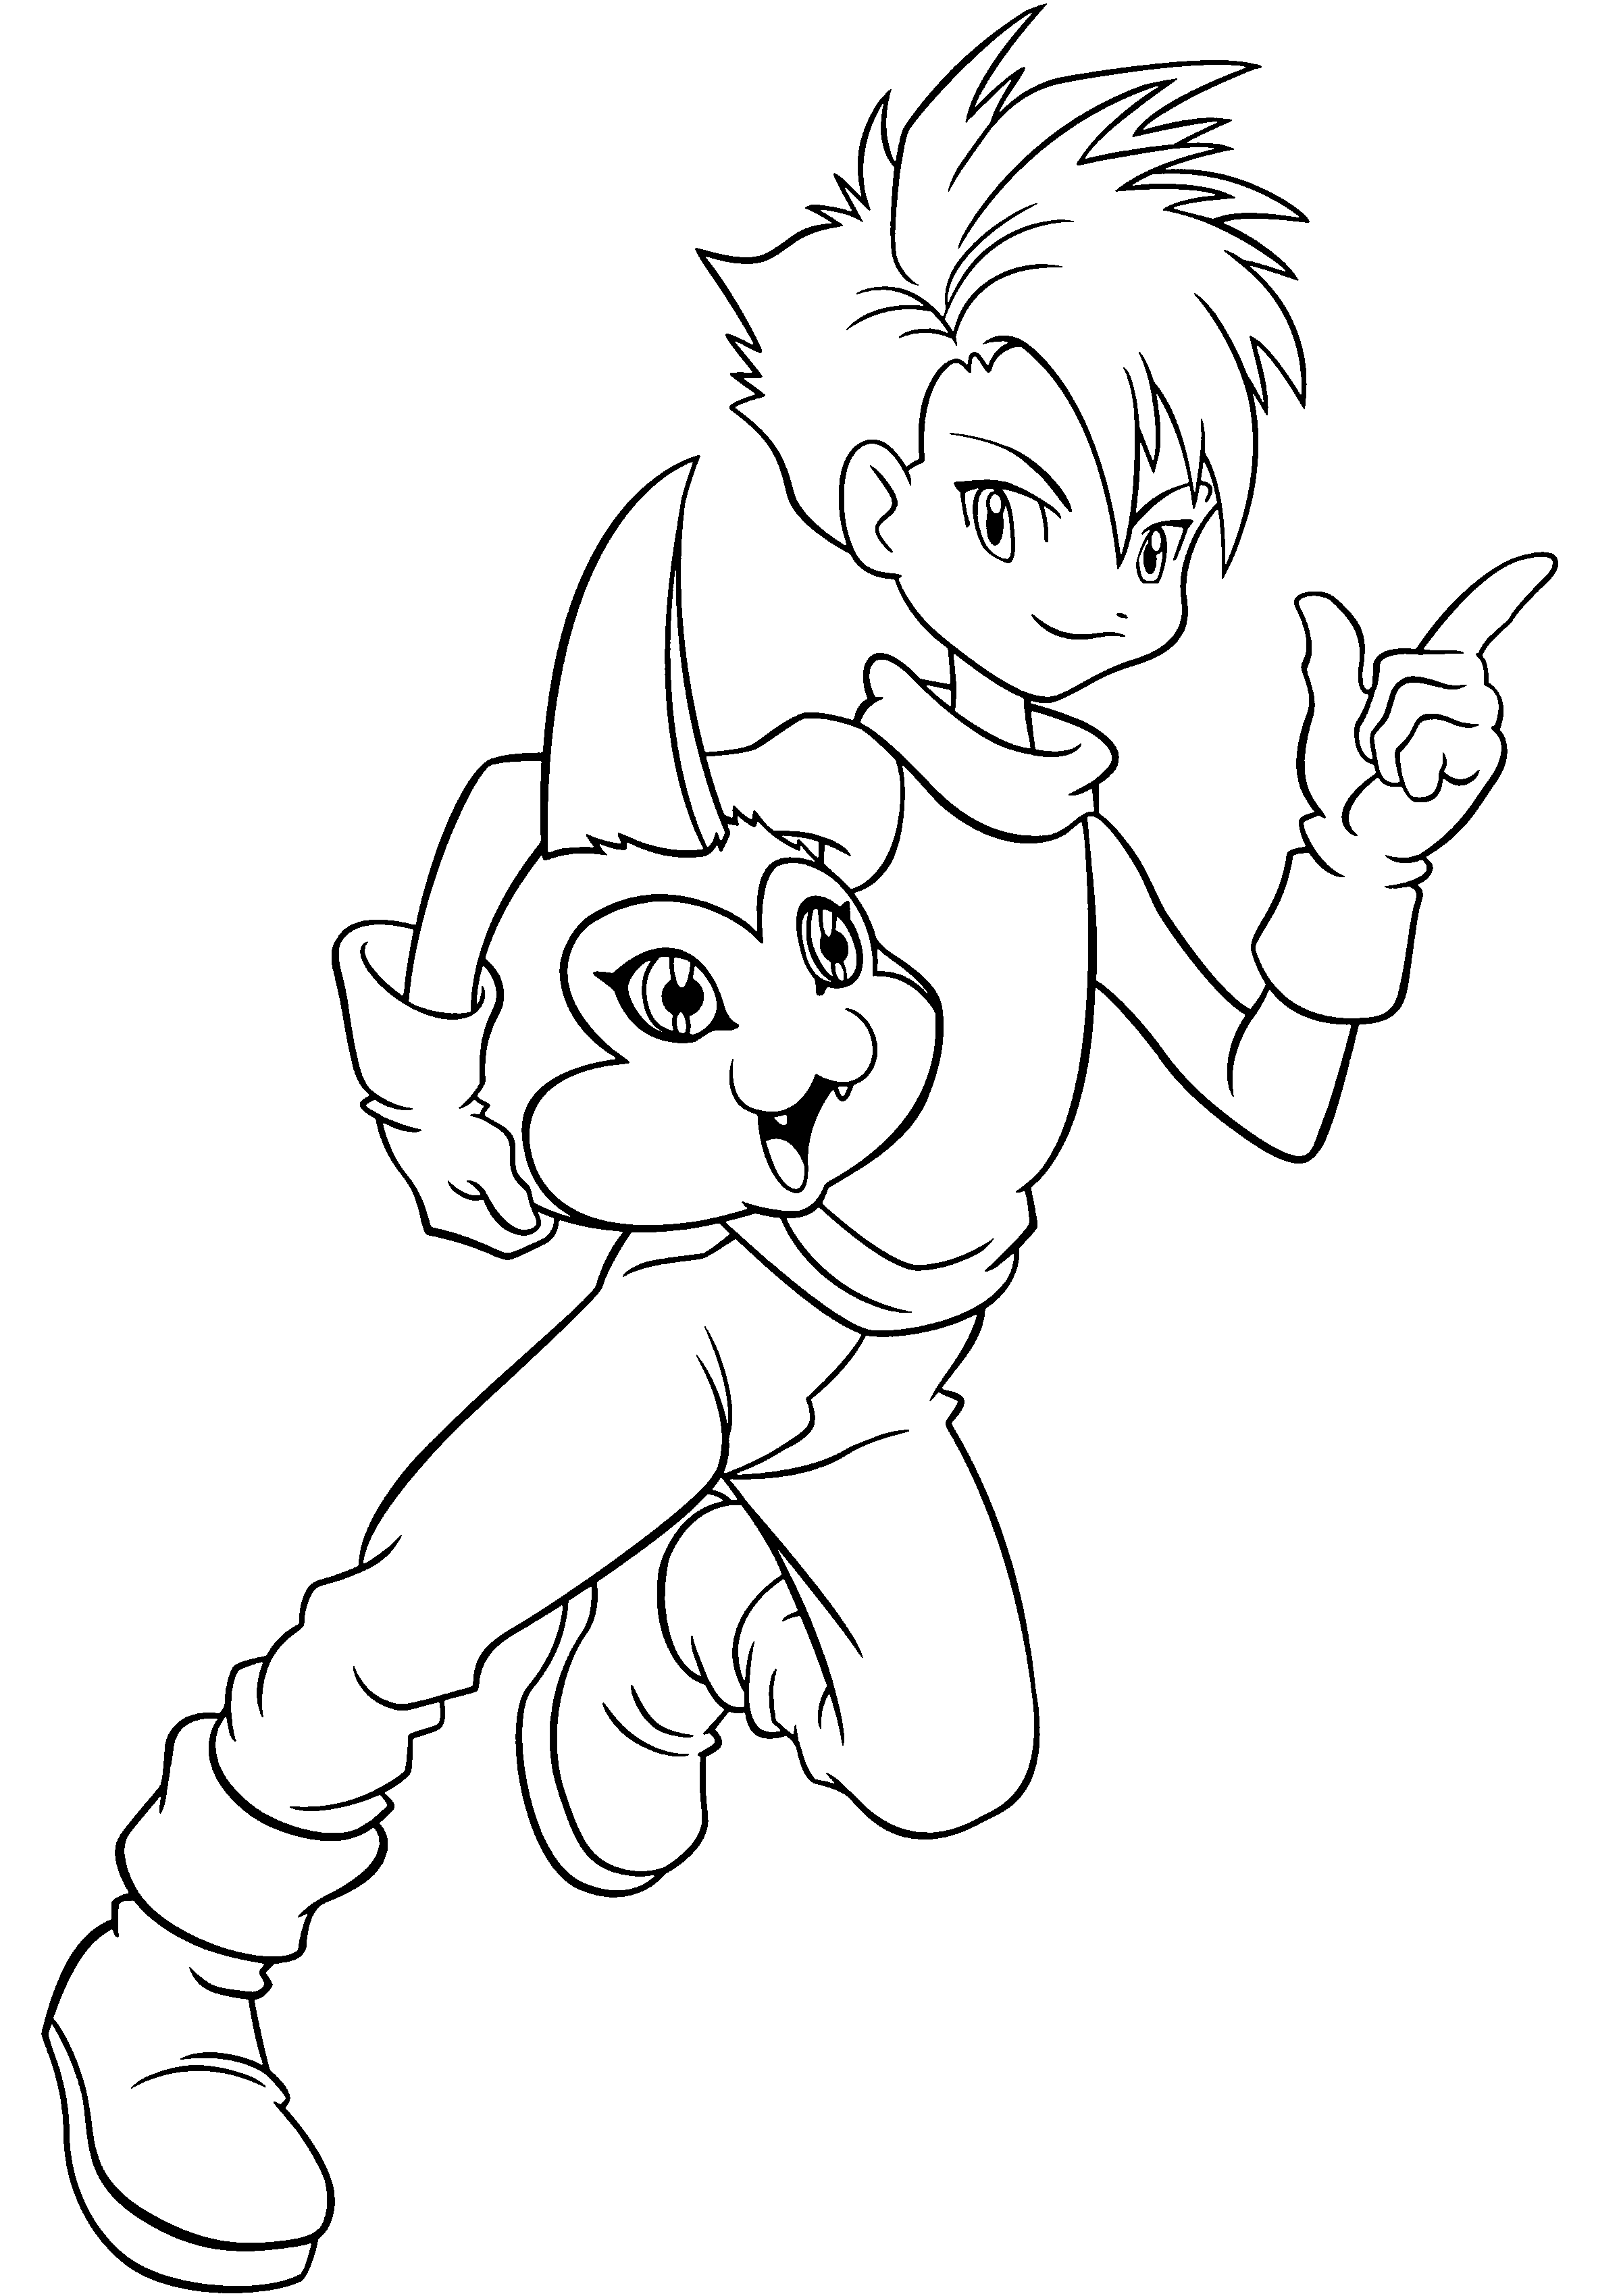 tanemon coloring pages - photo #10